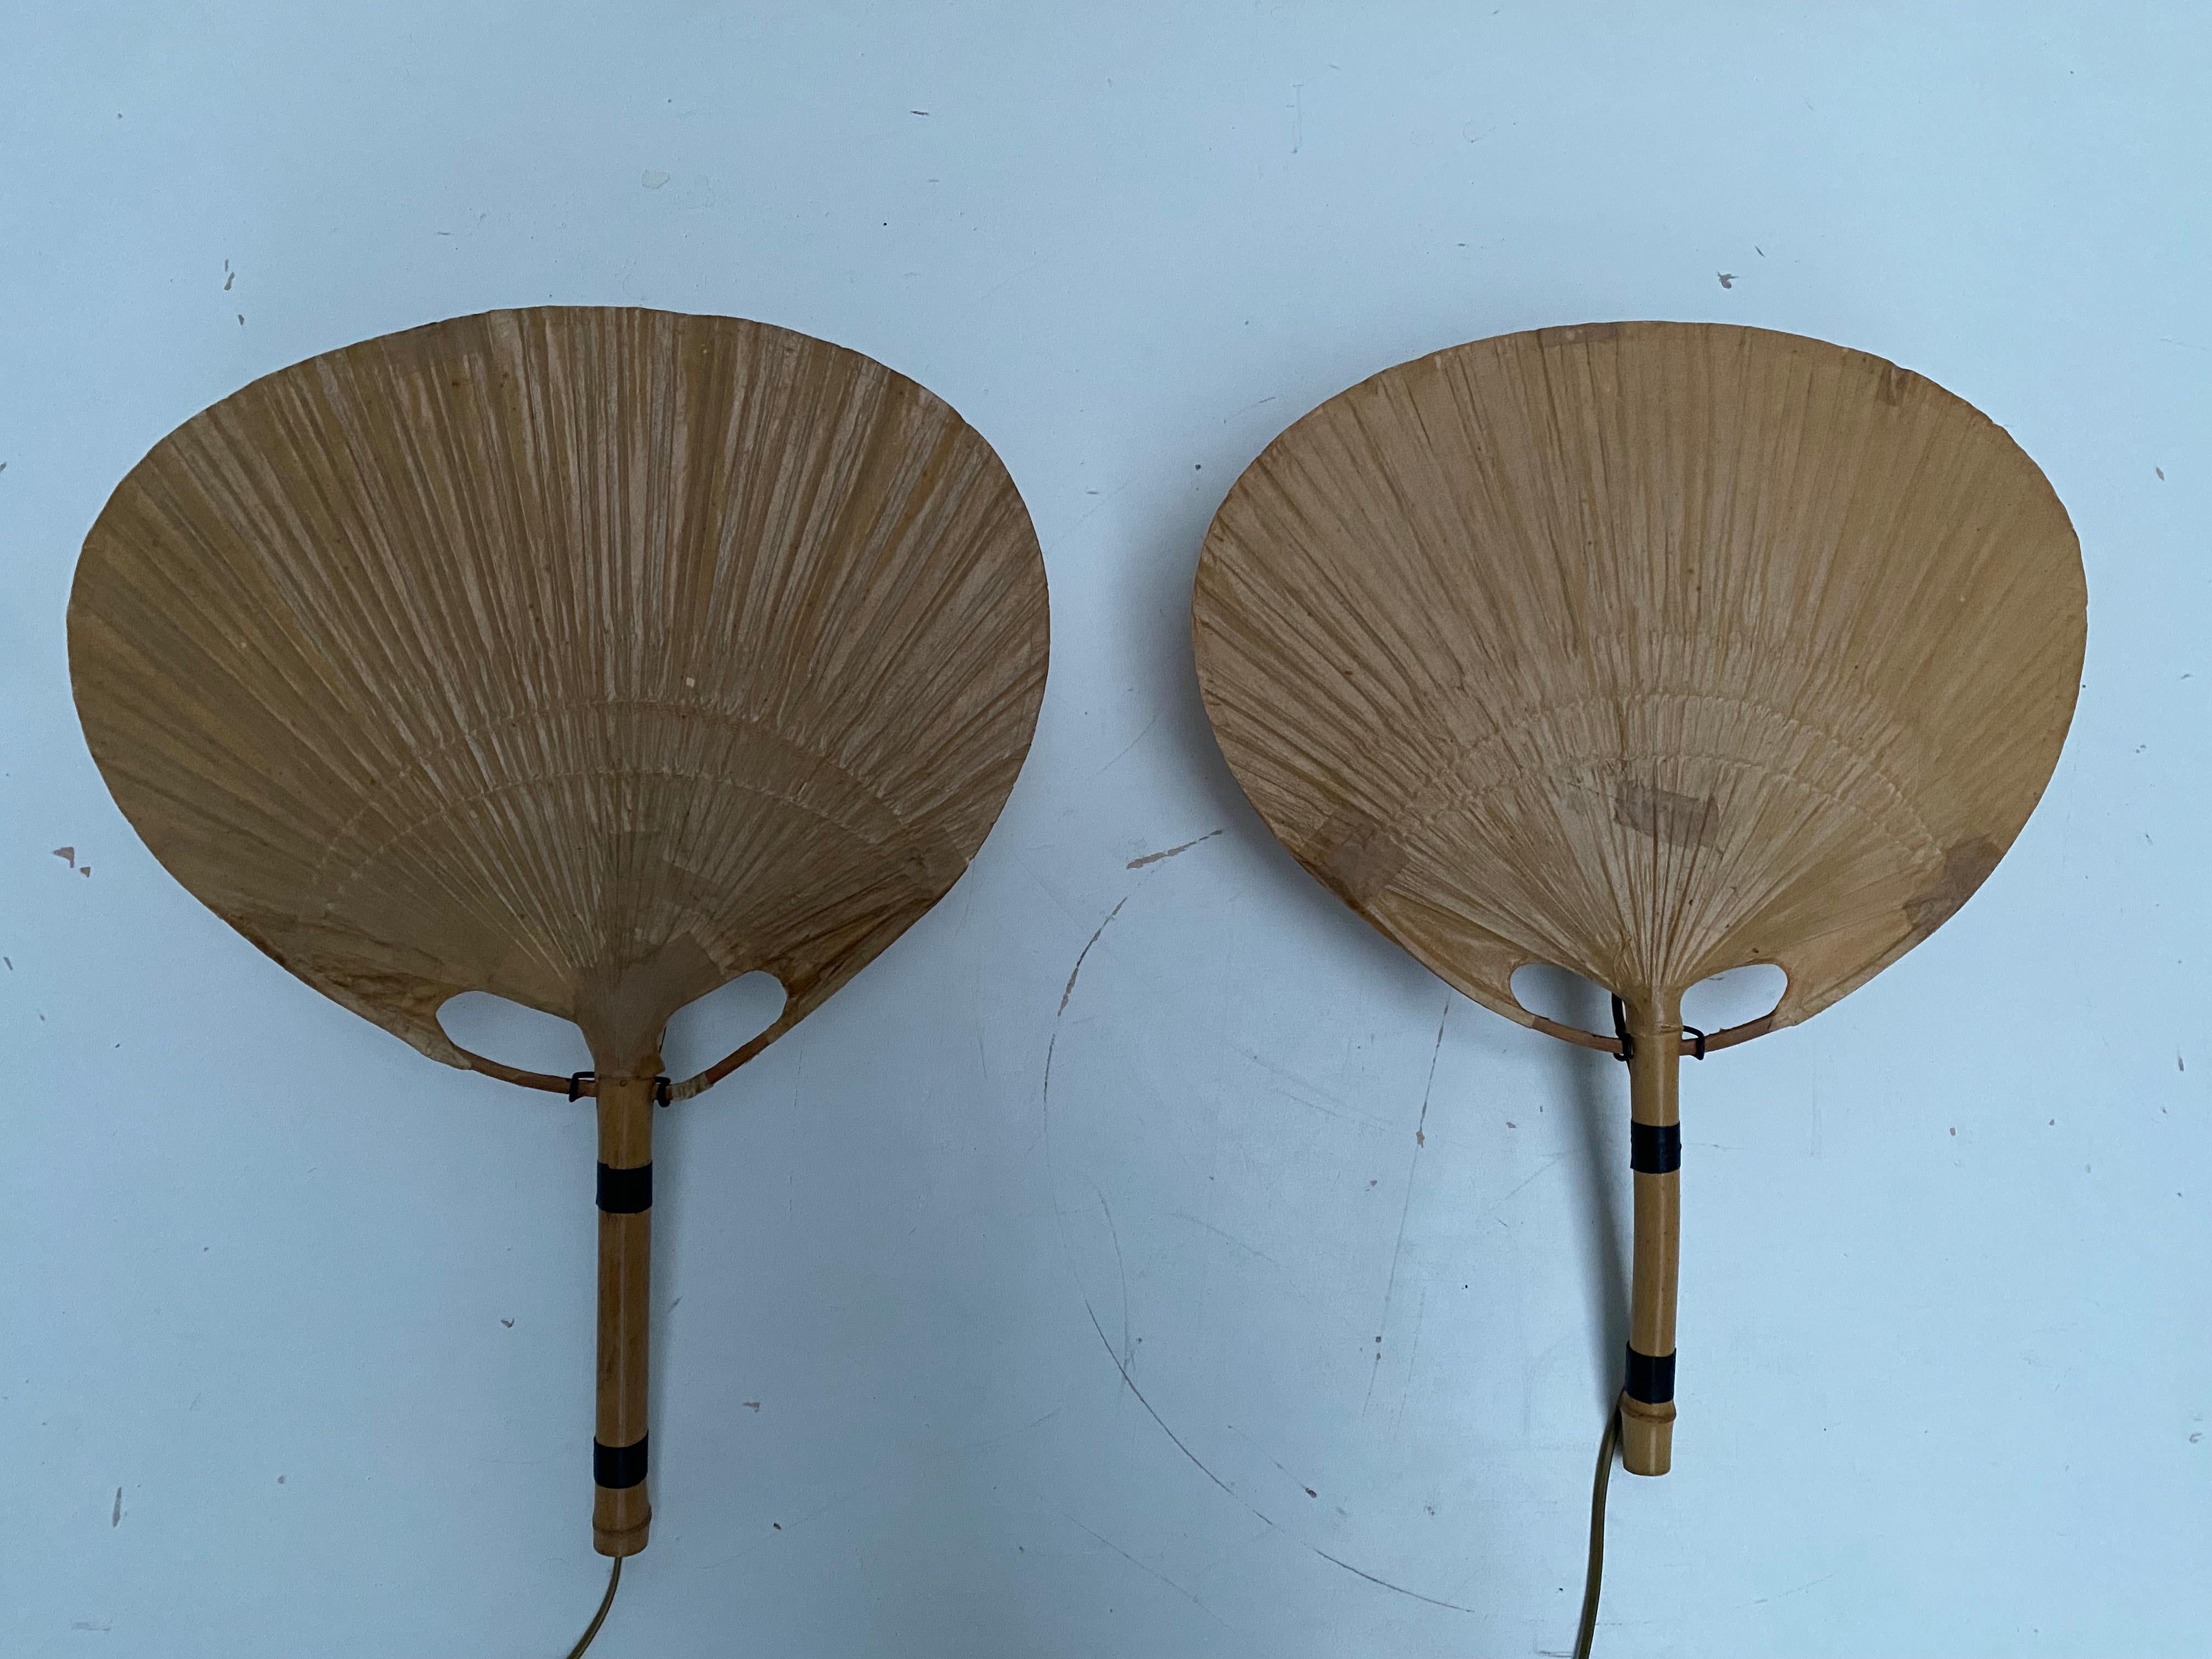 Rare Pair of Uchiwa II Japanese Fan Wall Appliques by Ingo Maurer Germany 1973 9